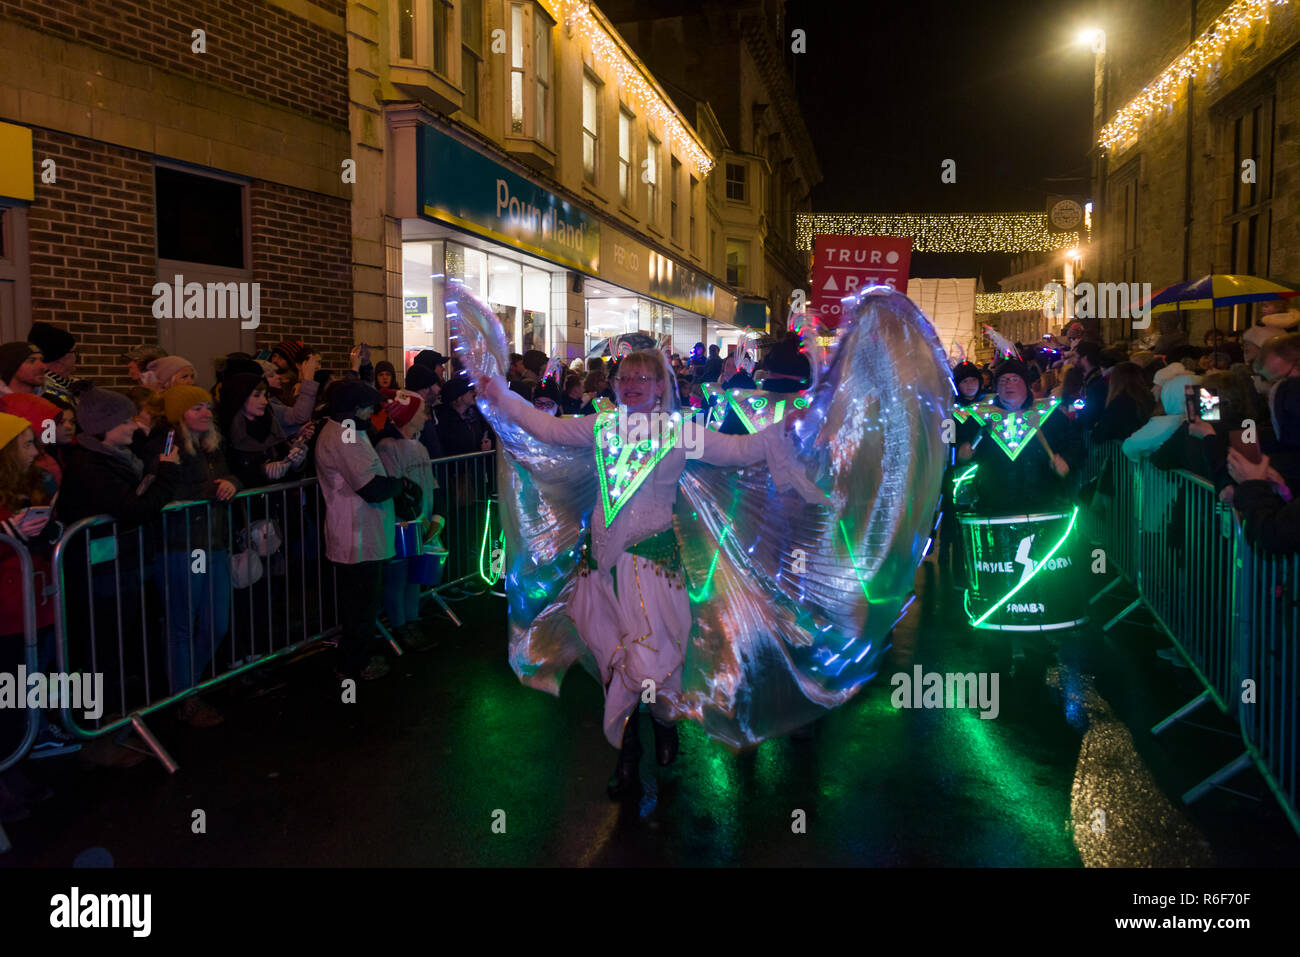 Truro, Cornwall, UK. 21/11/2018. The Truro lantern parade happens every year & is considered by many to signal that the Christmas countdown has begun. Stock Photo